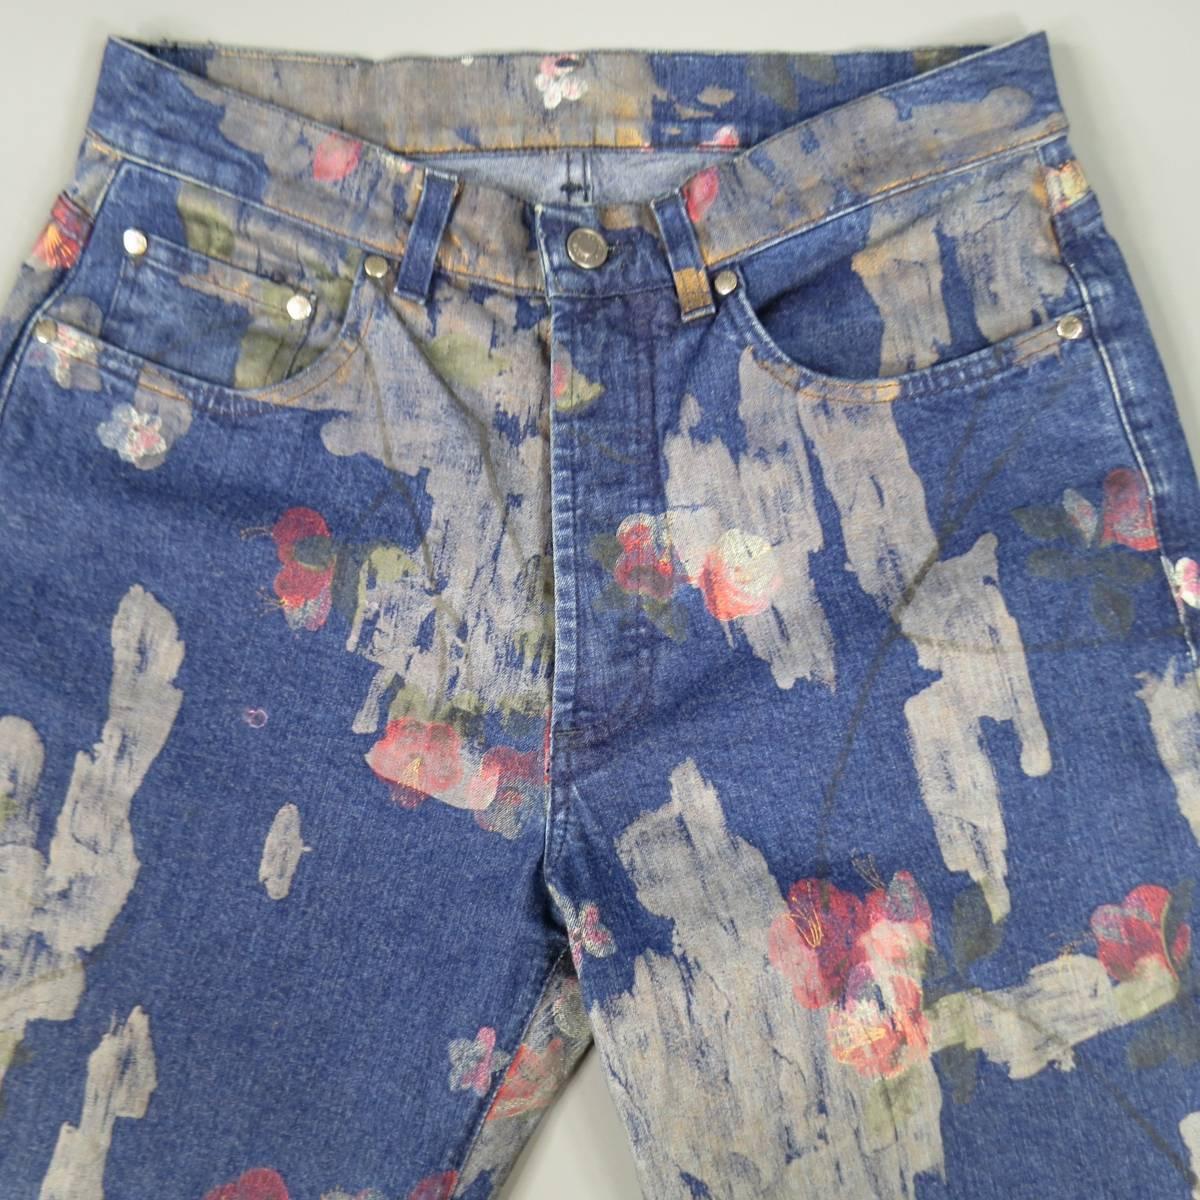 TOM FORD for GUCCI wide leg denim trouser is 100% cotton and features a medium-dark wash, button fly closure and hand painted abstract floral design throughout, made in Italy.
 
Excellent Pre-Owned Condition    Marked: 44
 
Measurements:
